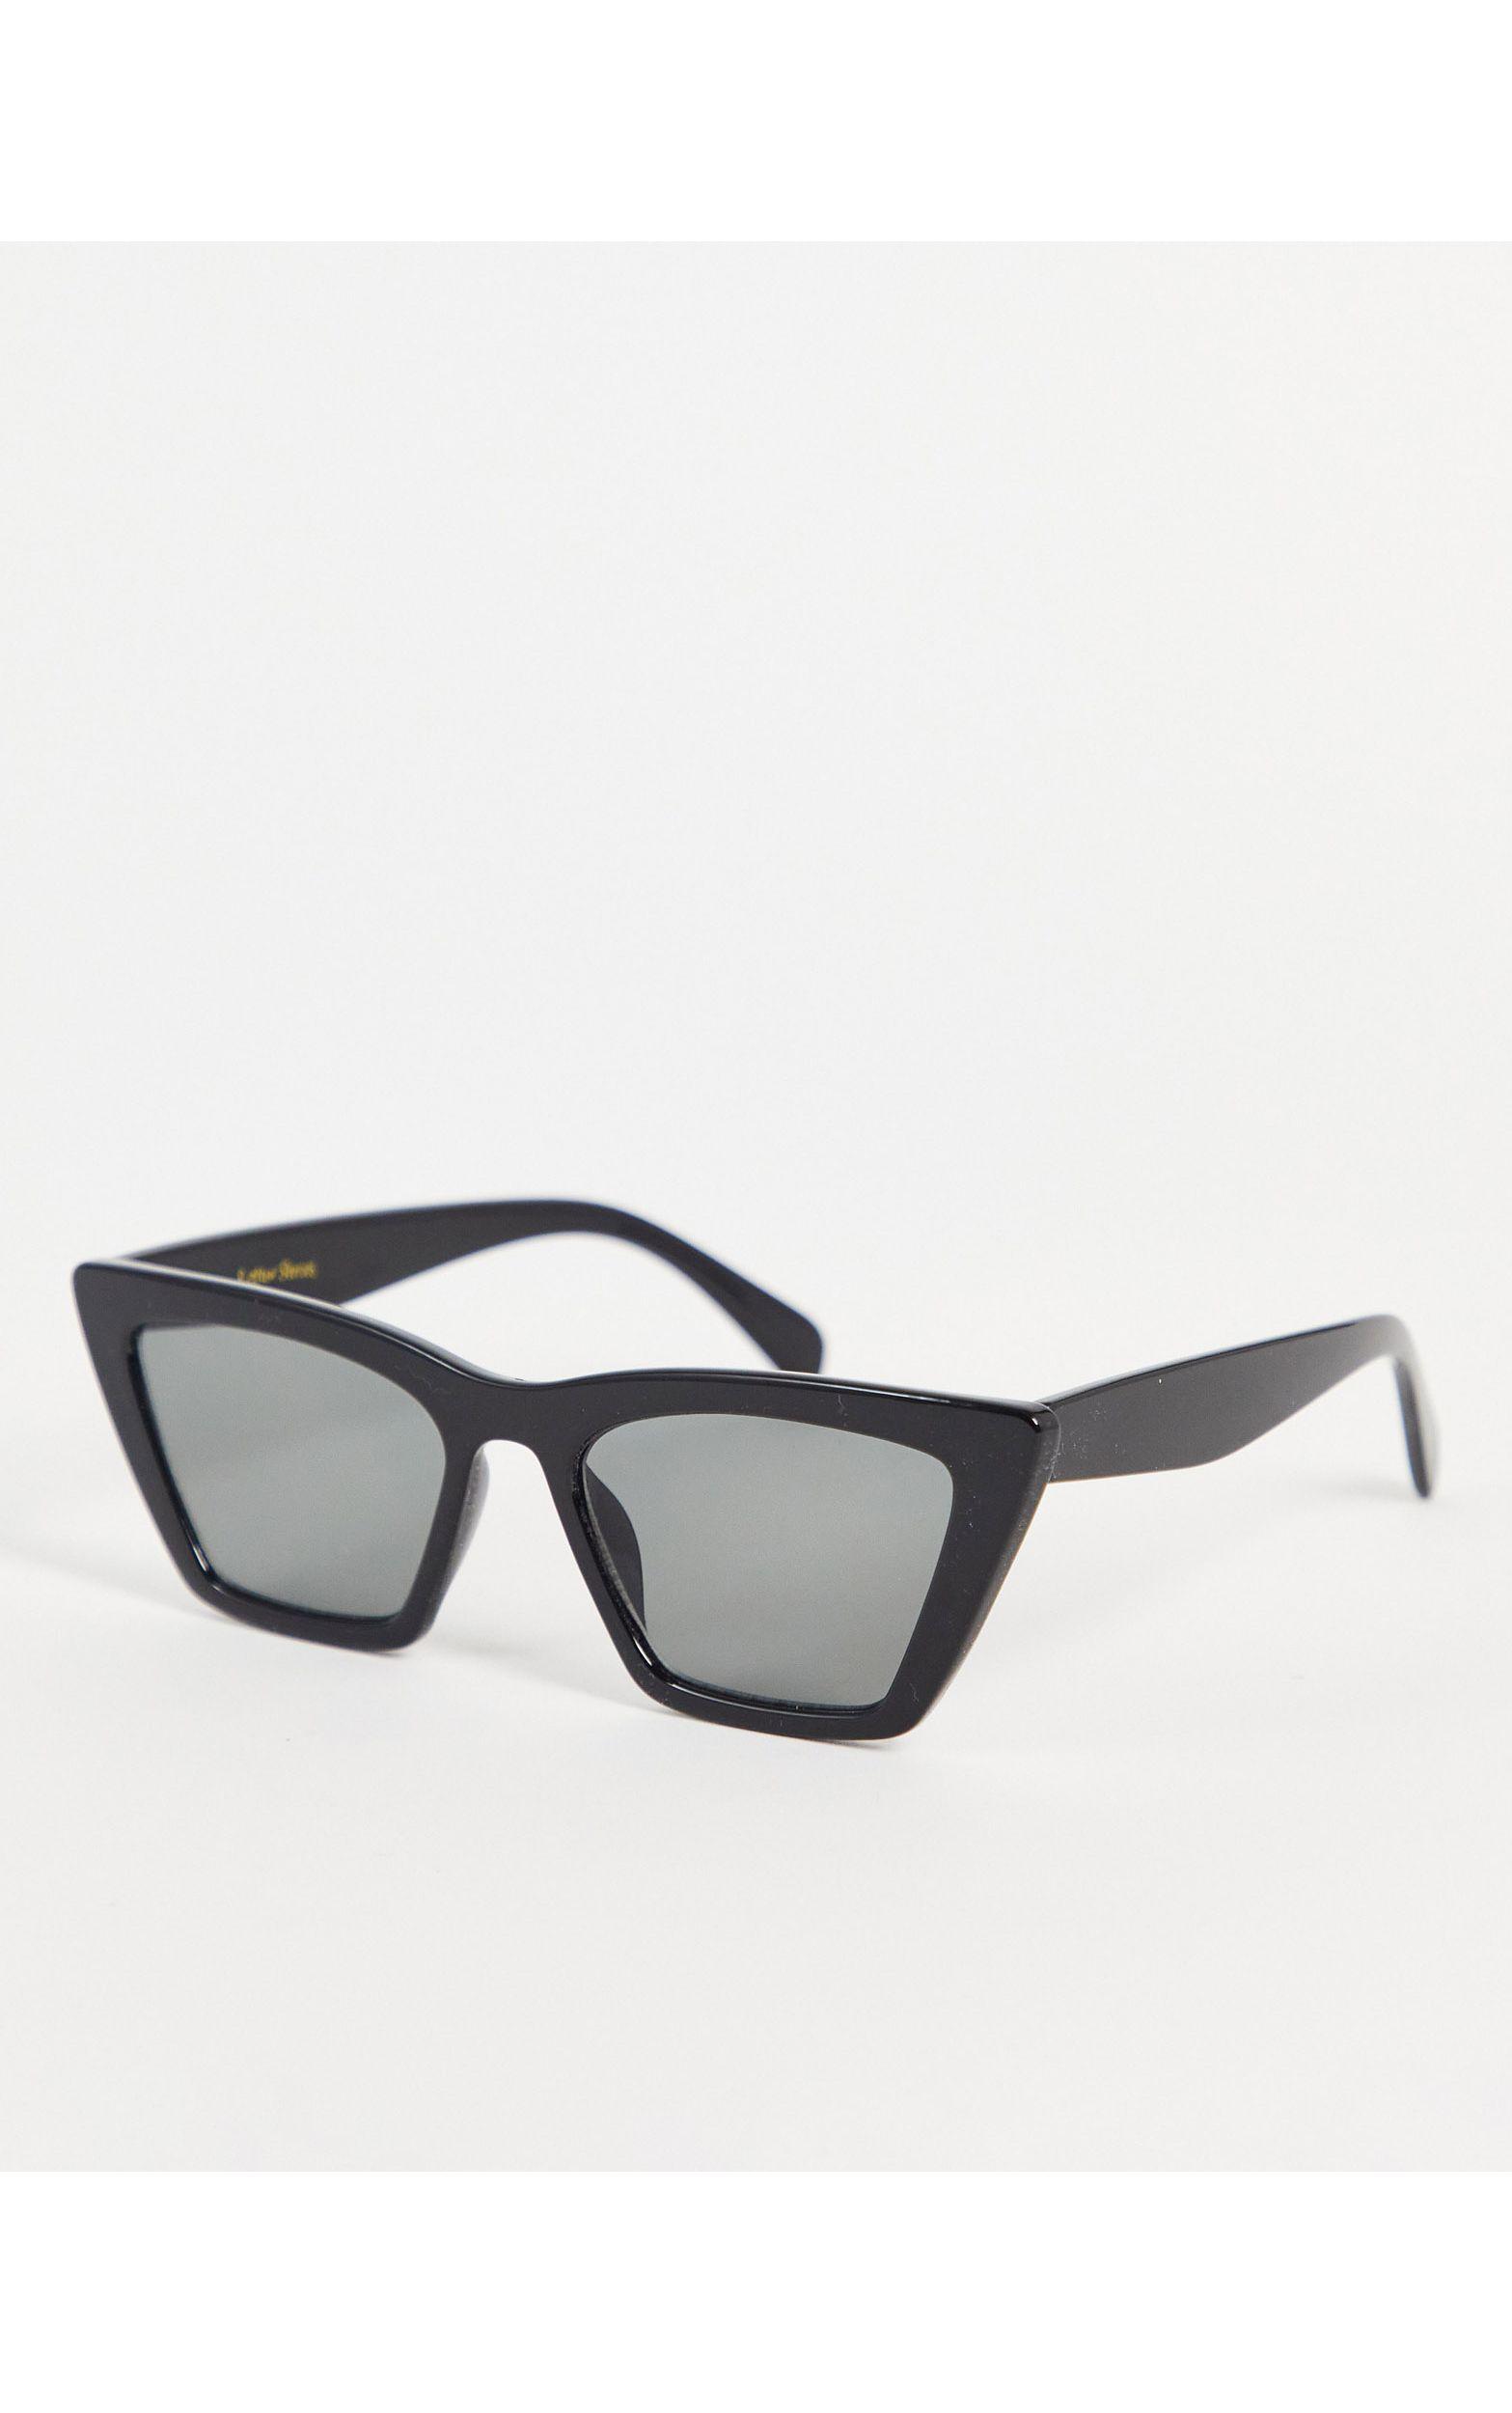 & Other Stories Plastic Cat Eye Sunglasses in Black | Lyst